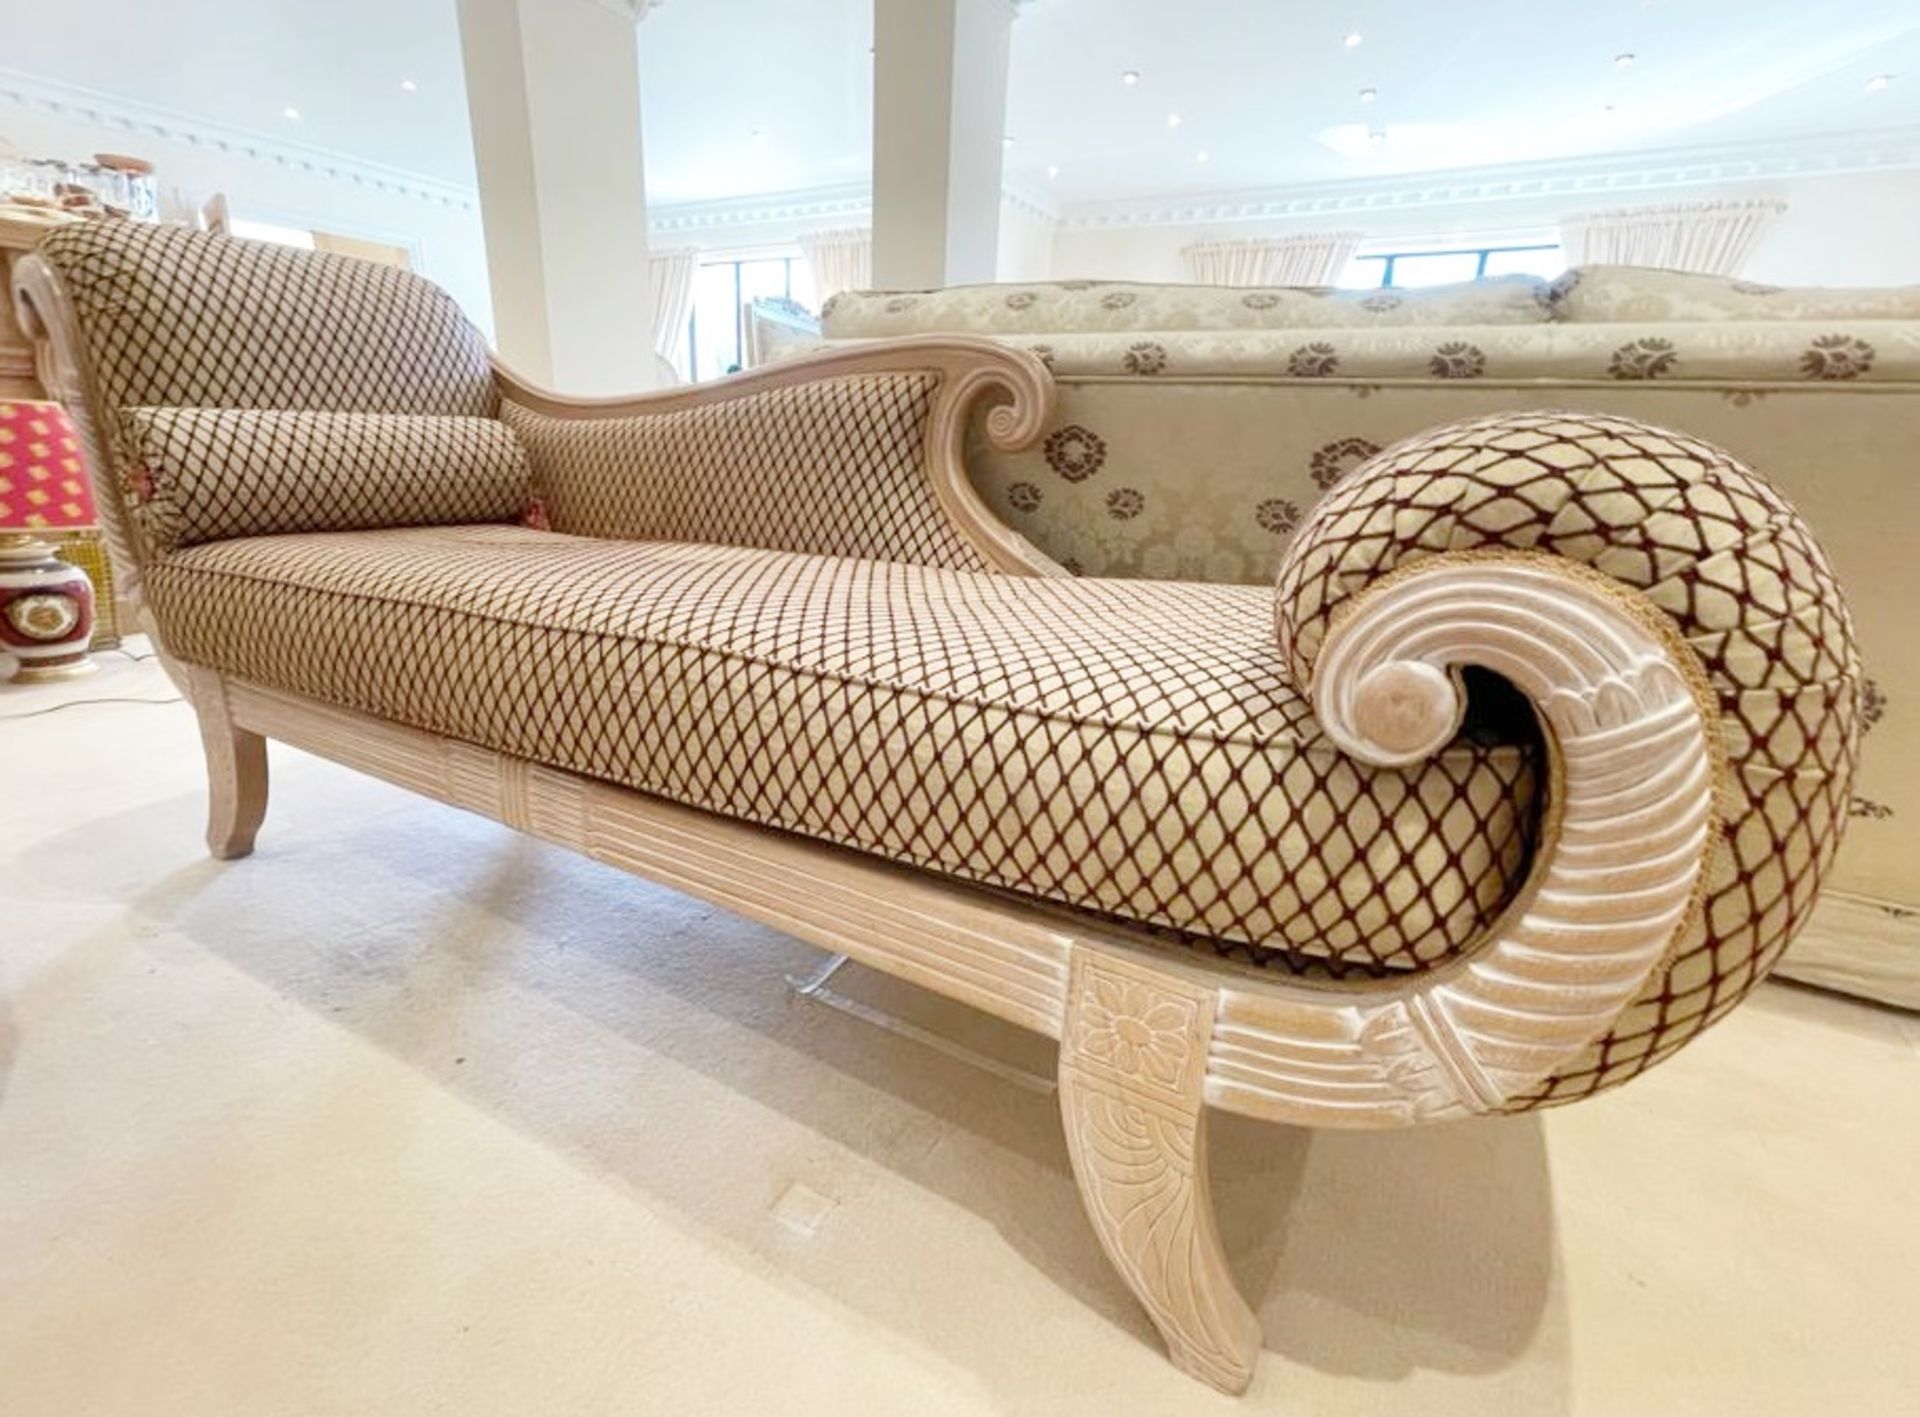 1 x Elegant Chaise Longue Sofa With Carved Wooden Frame, Scroll End and Diamond  Pattern Fabric - NO - Image 11 of 16